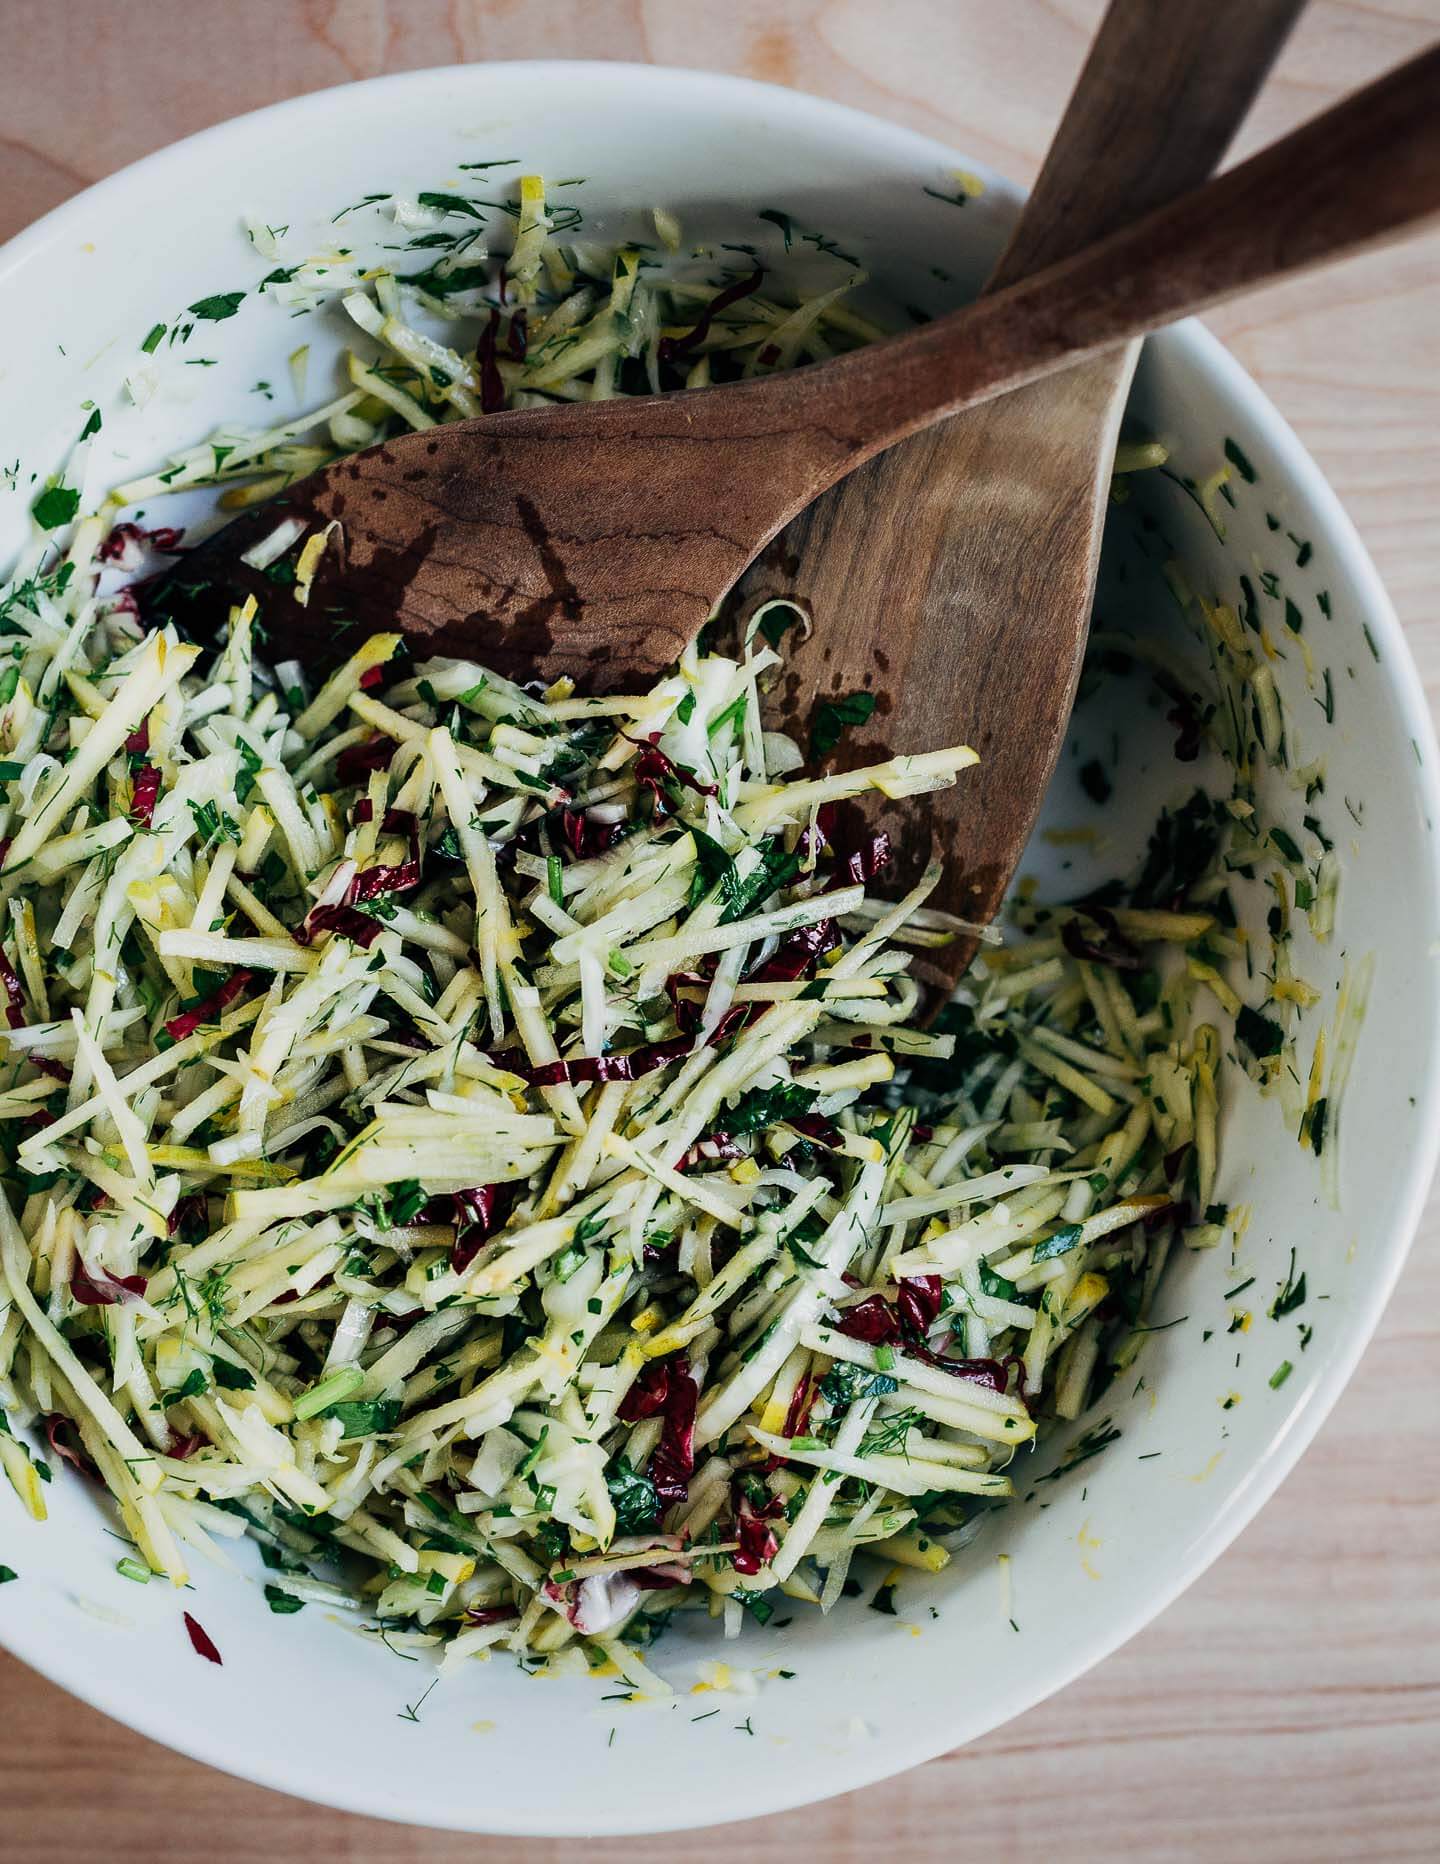 A bowl of slaw with wooden salad tongs.